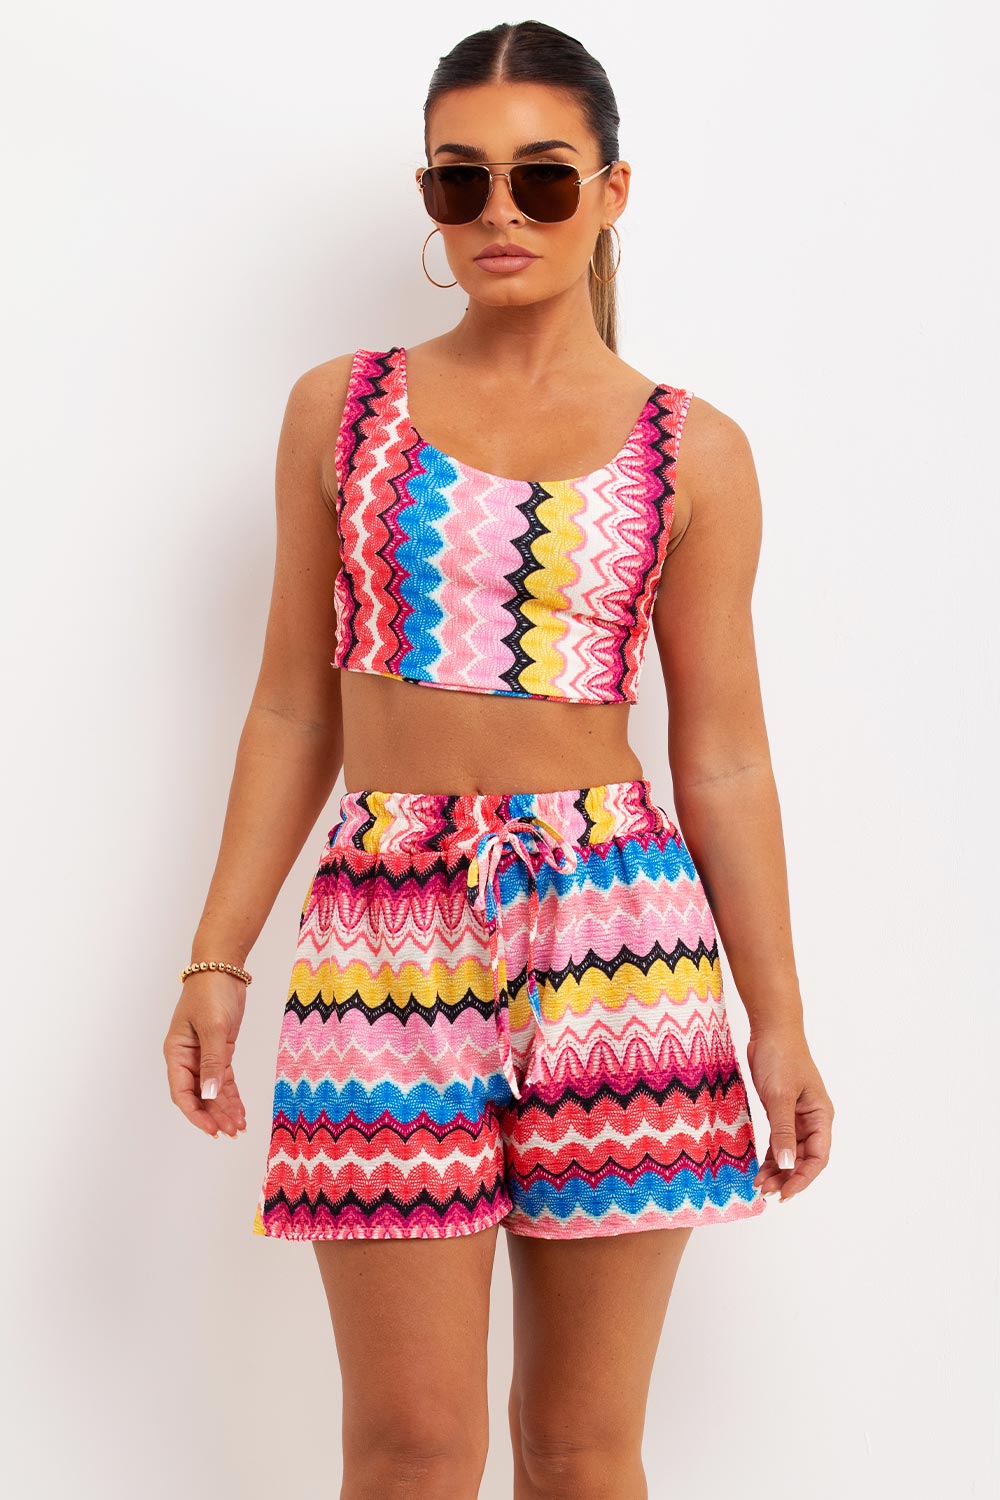 shorts and crop top co ord summer holiday outfit womens uk